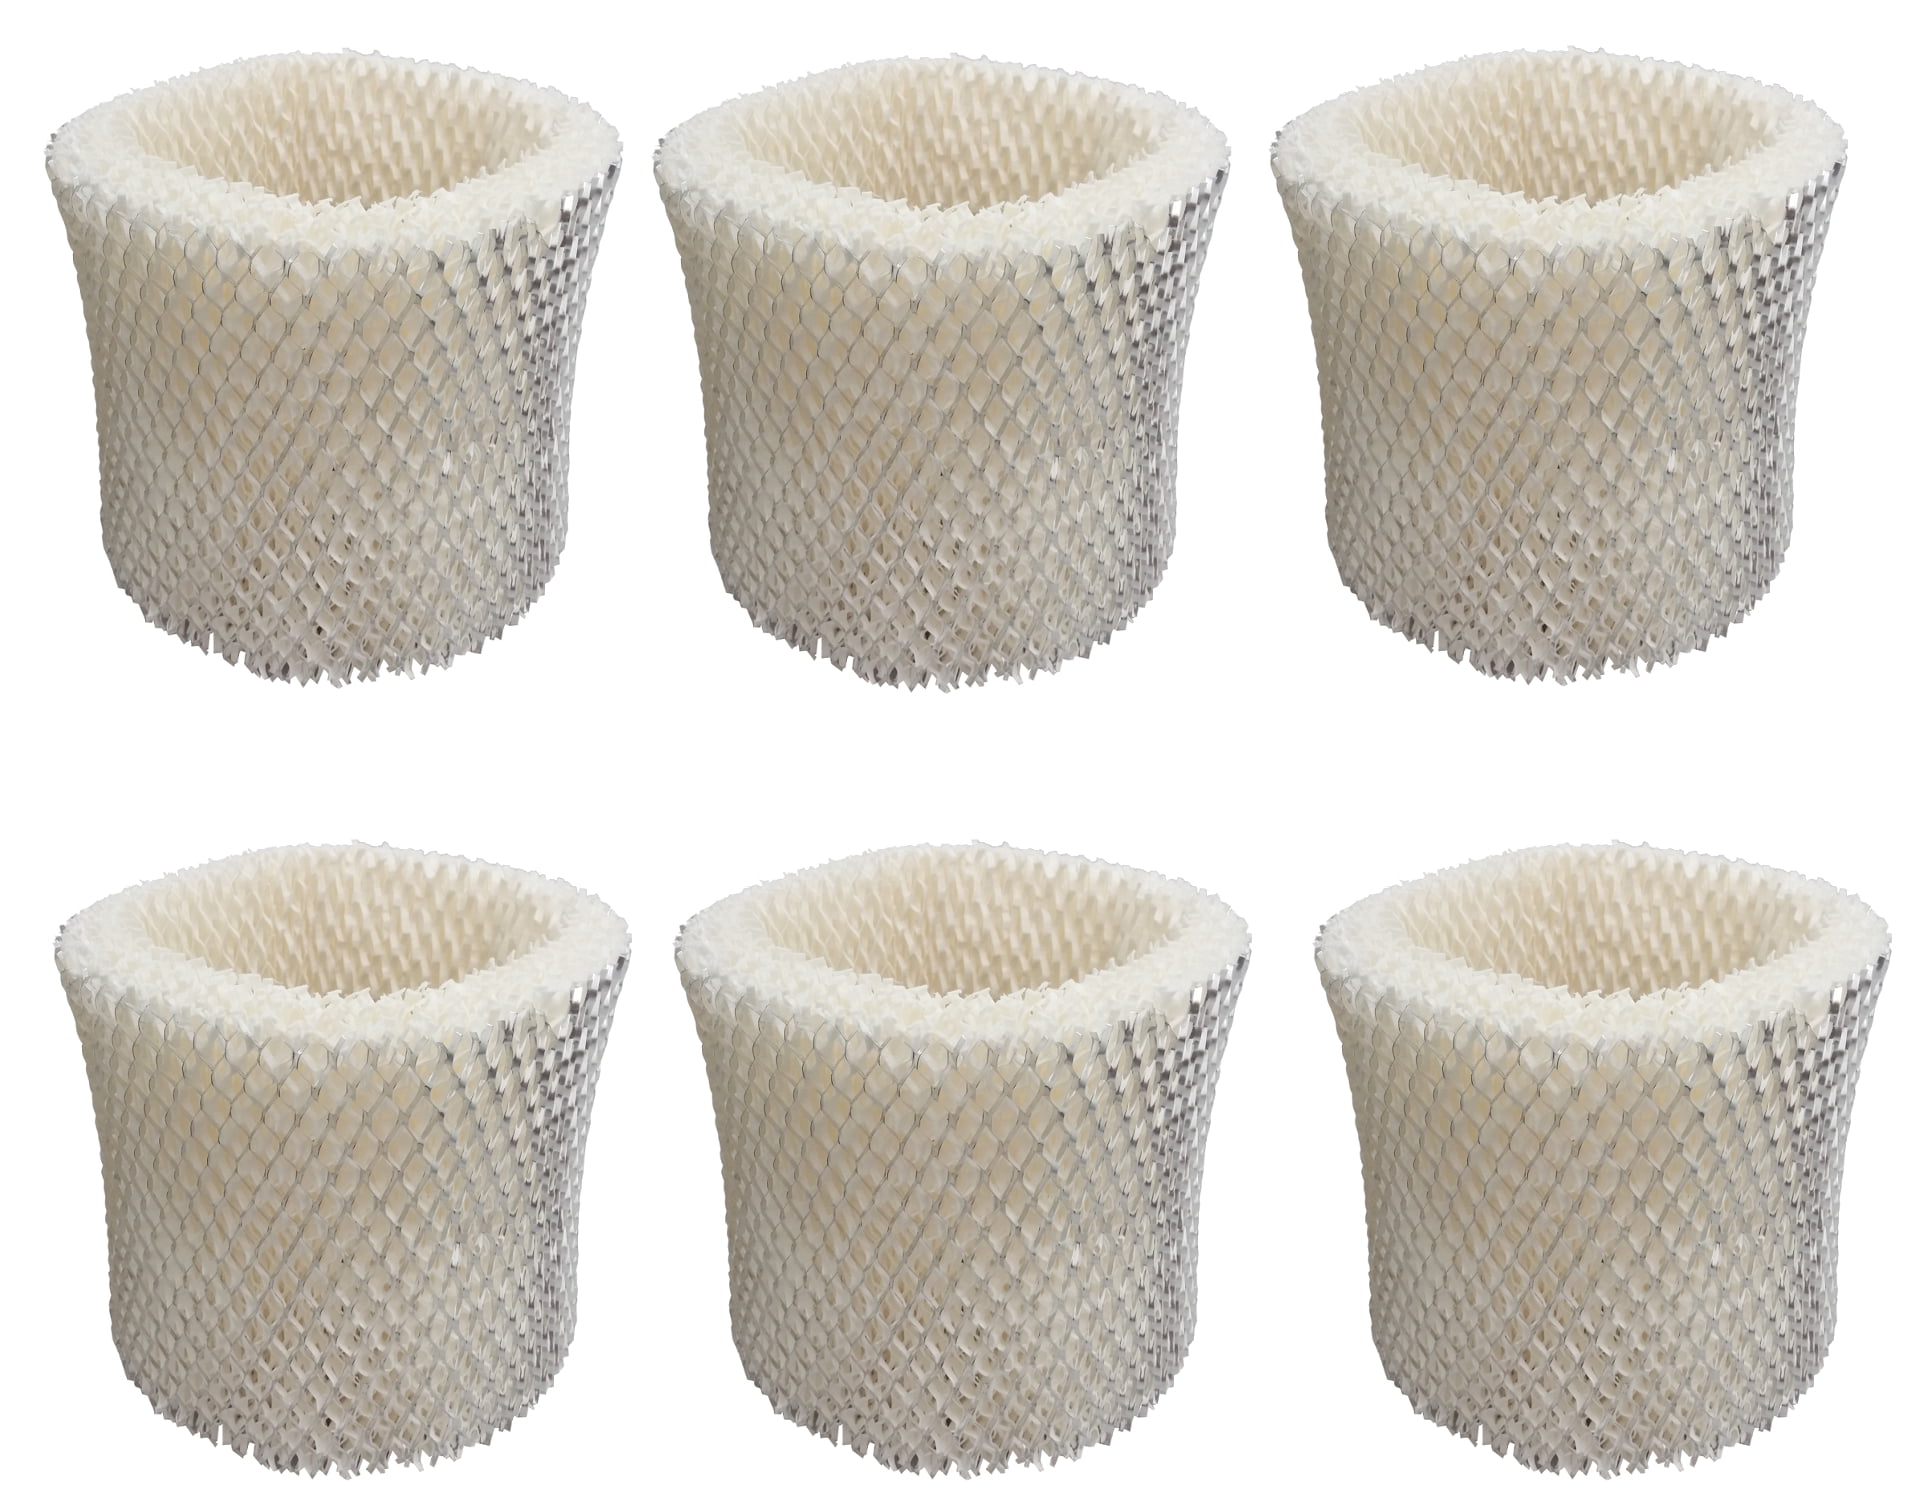 Filter for H64-PDQ-4 Extended Life Humidifier Wick Holmes Sunbeam 12-PACK